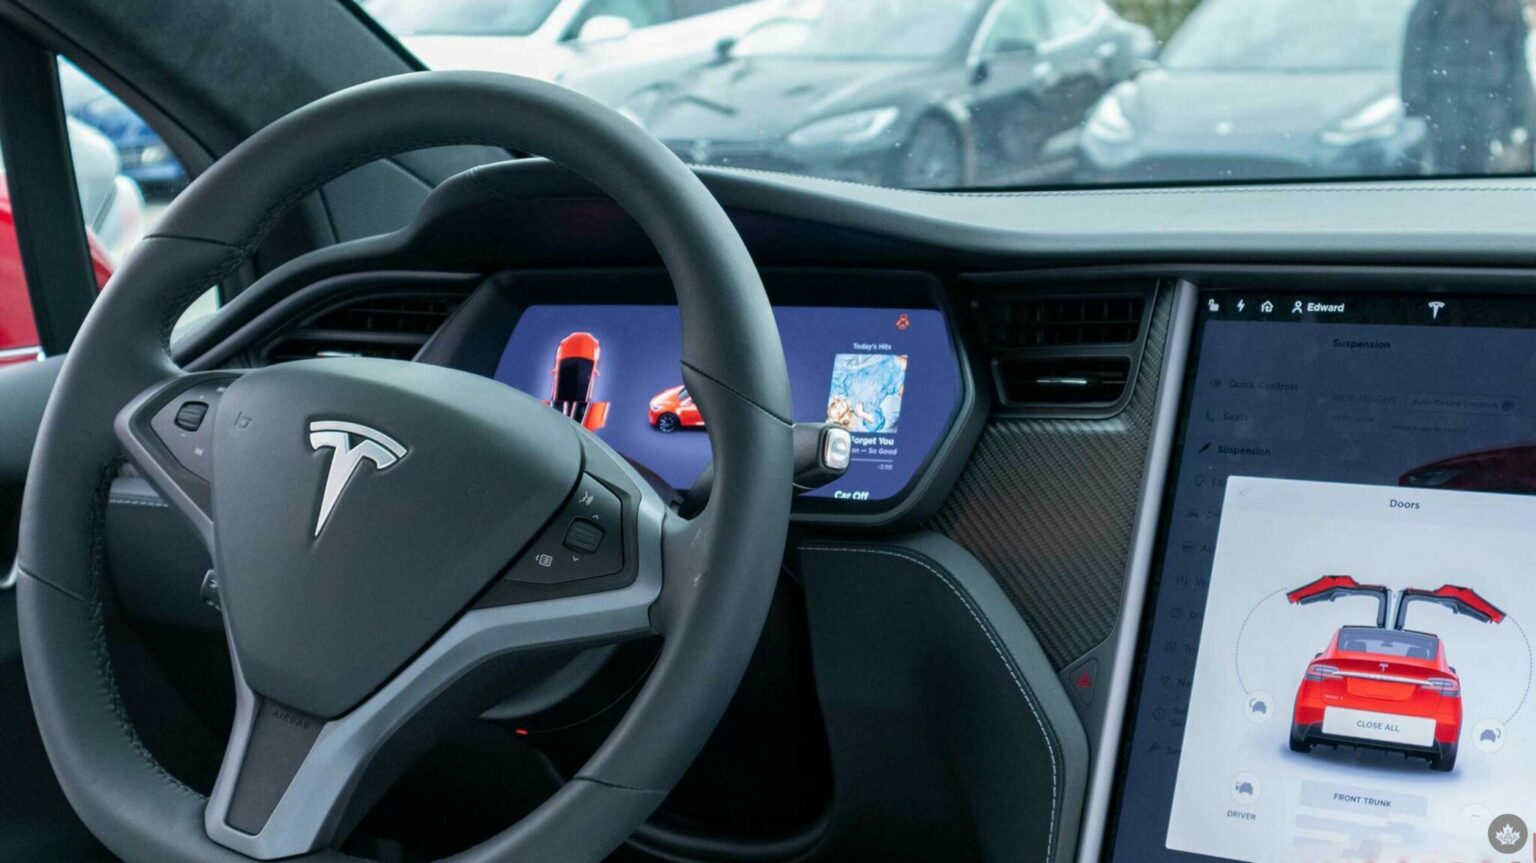 Tesla’s lawyers say lack of ‘Full Self Driving’ is not ‘fraud’